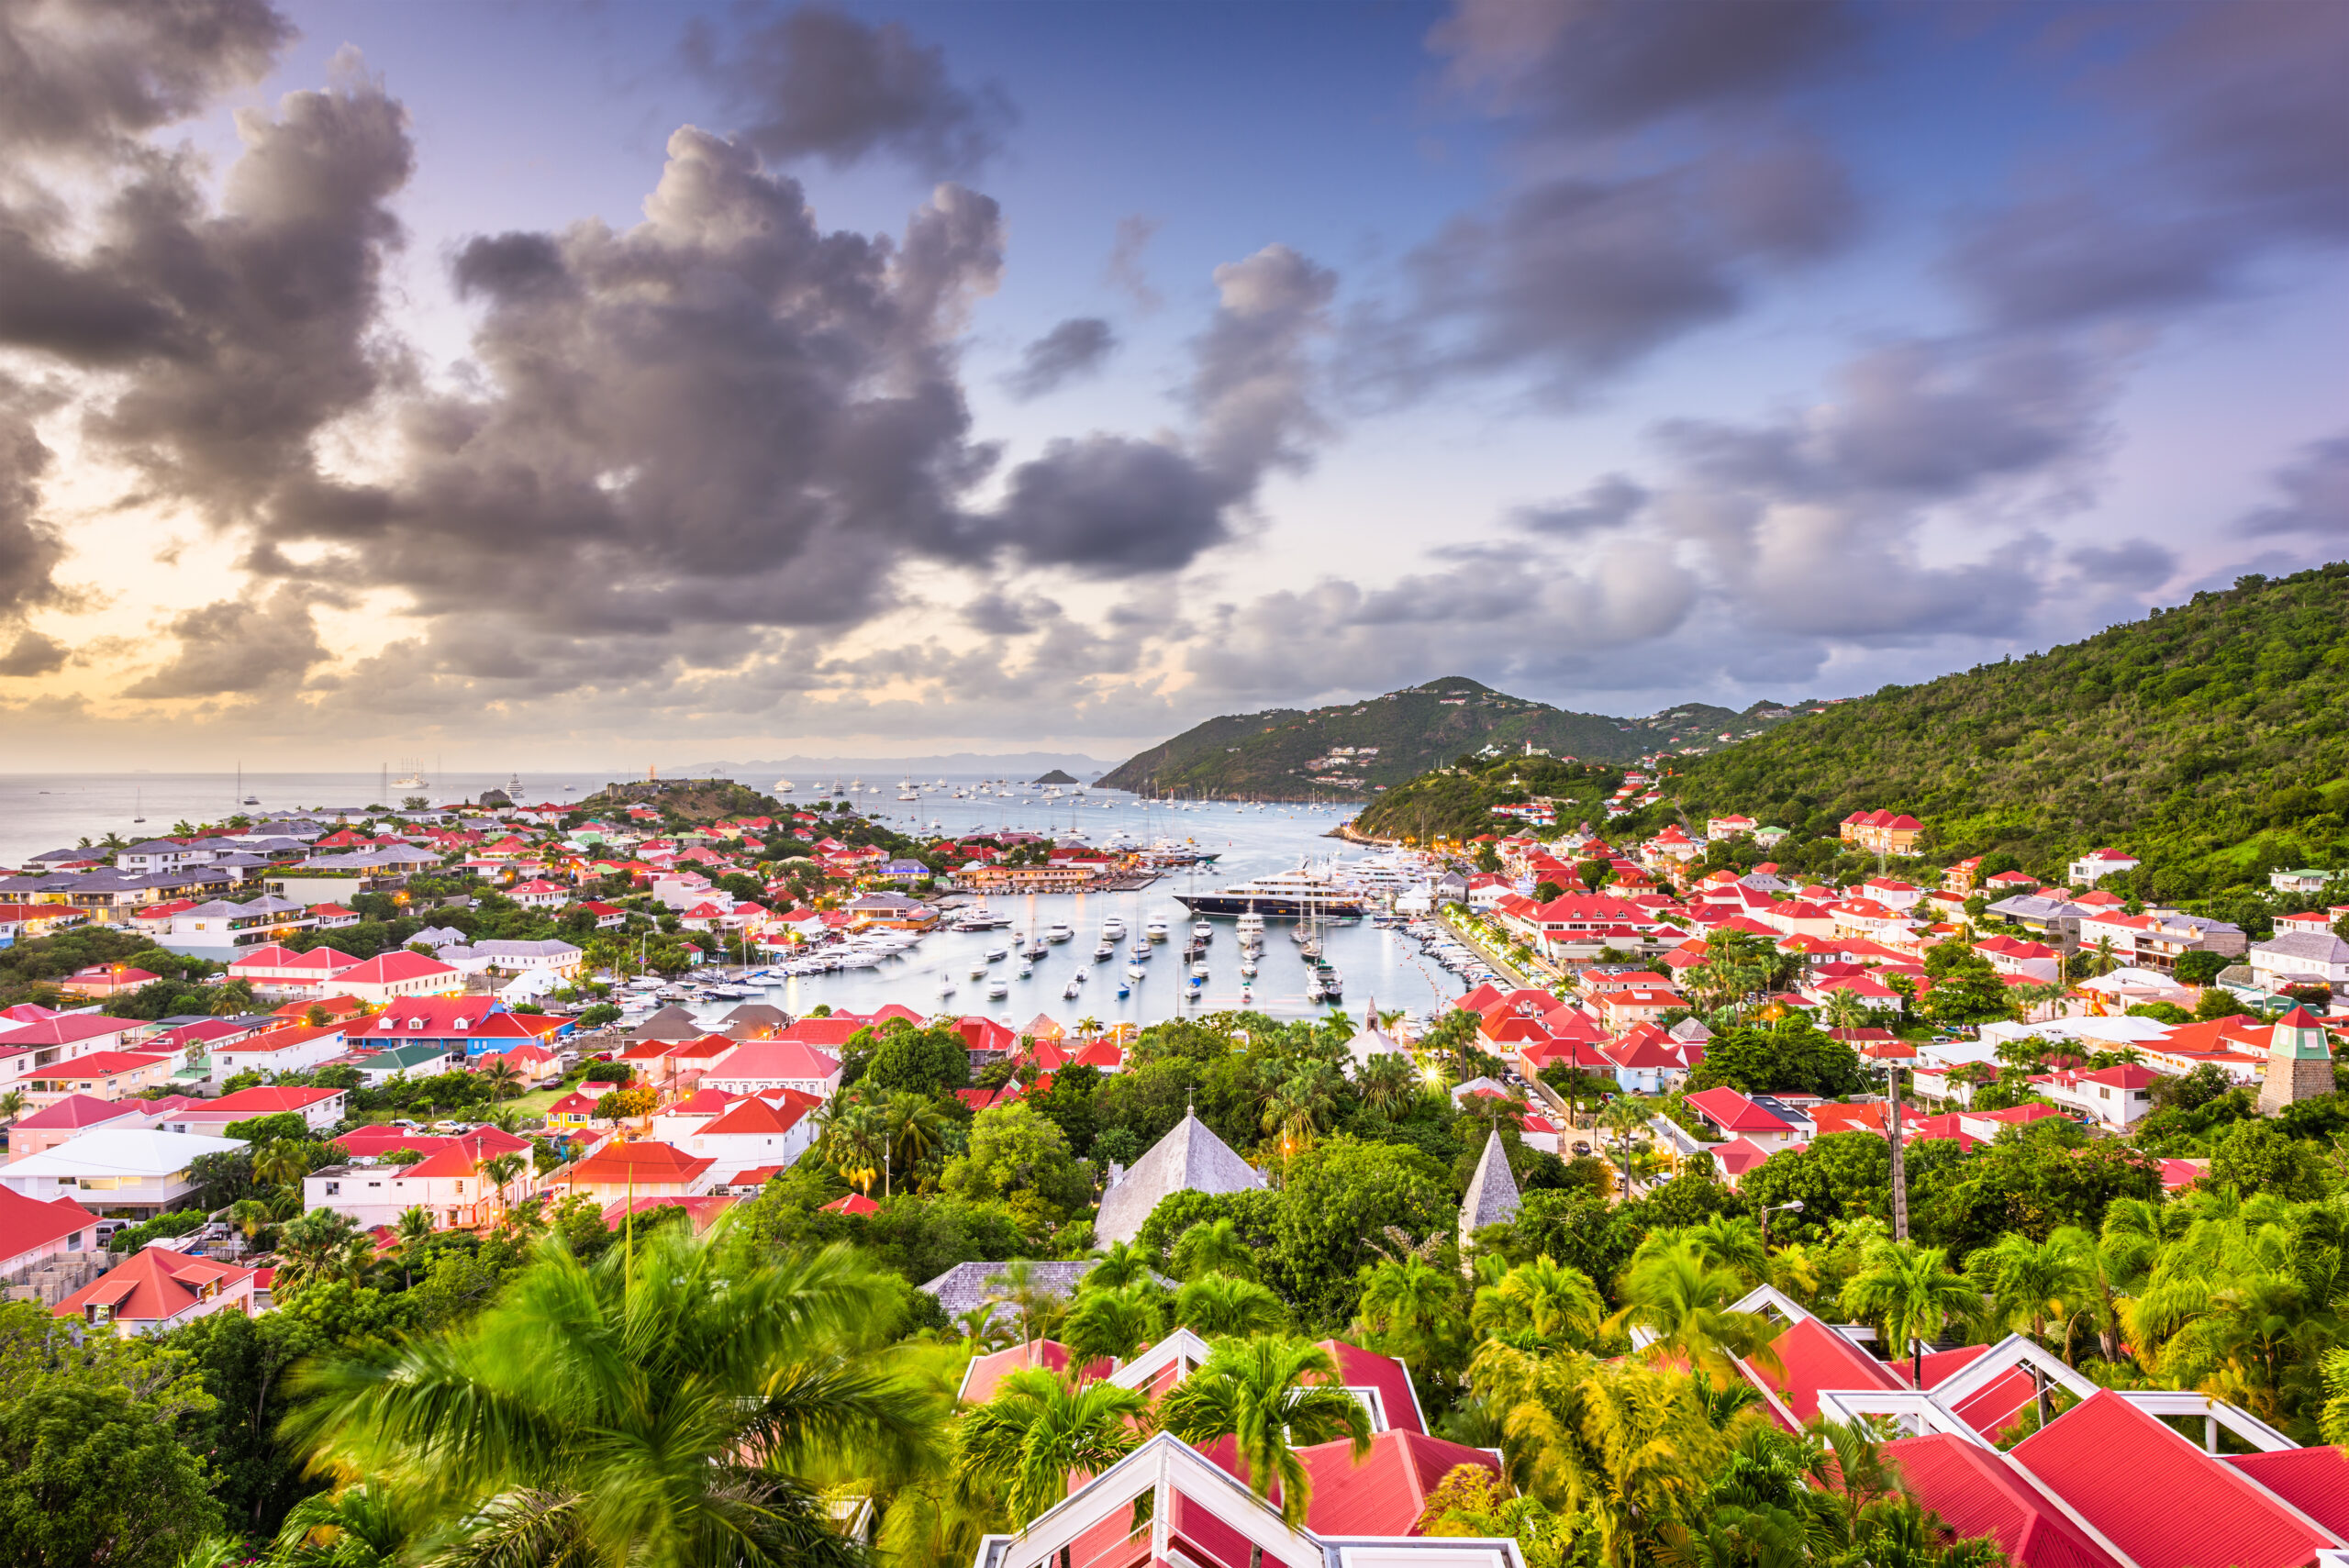 15 Unforgettable Things to Do in St Barts: a Useful Guide [2023]